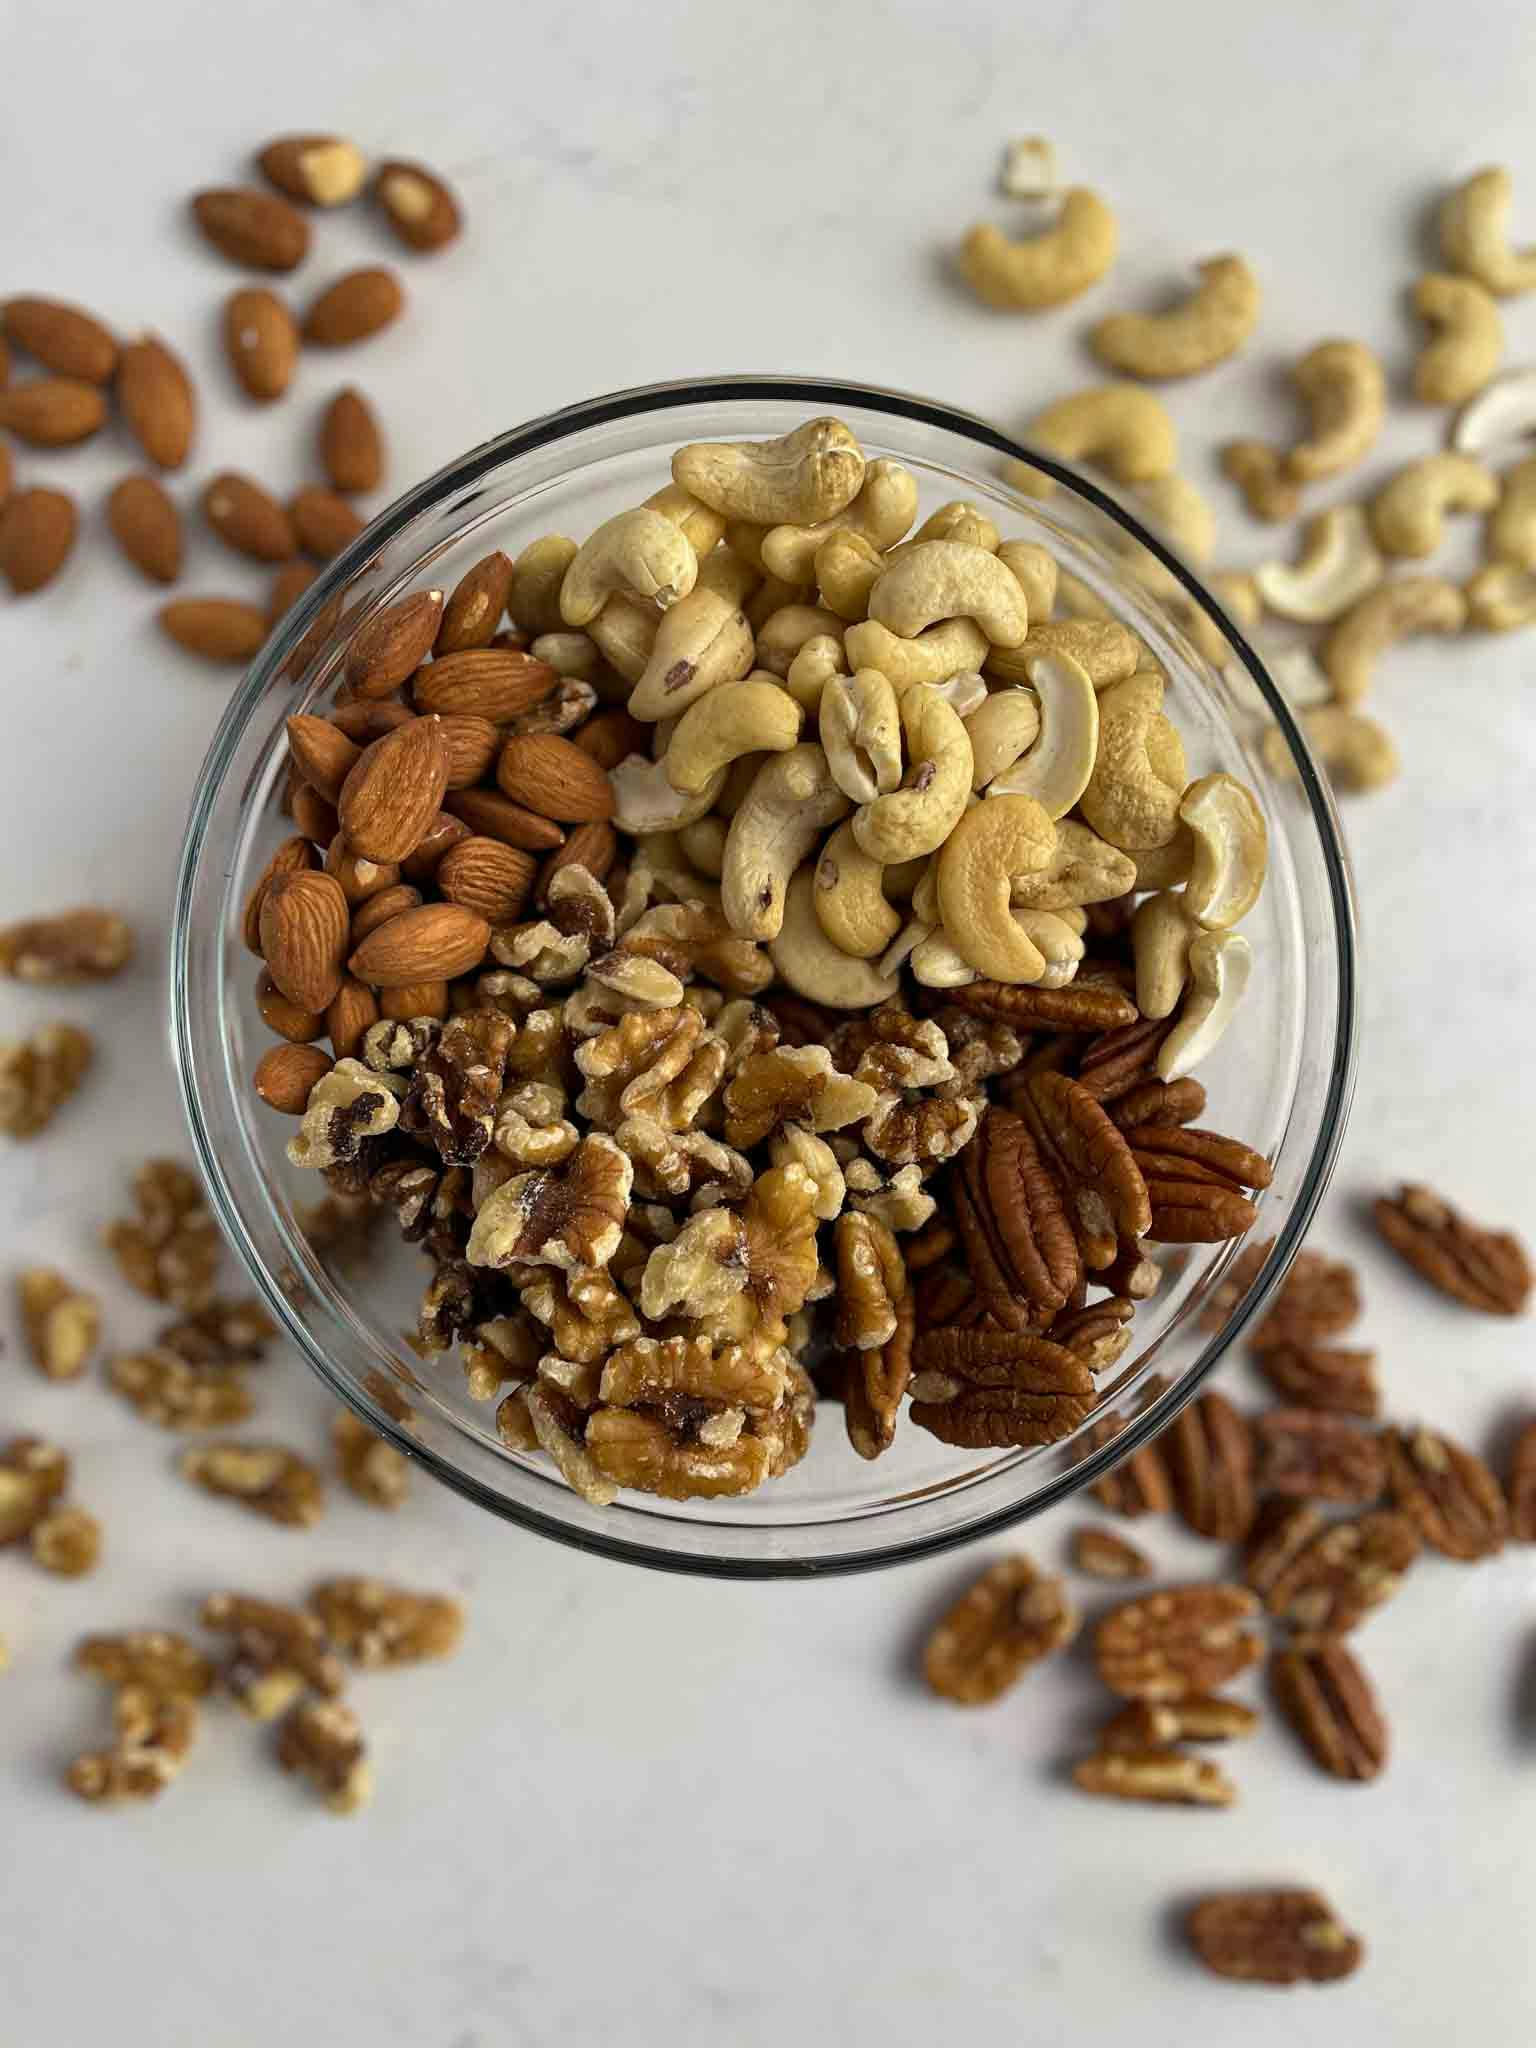 Bowl full of nuts used in the harvest trail mix.